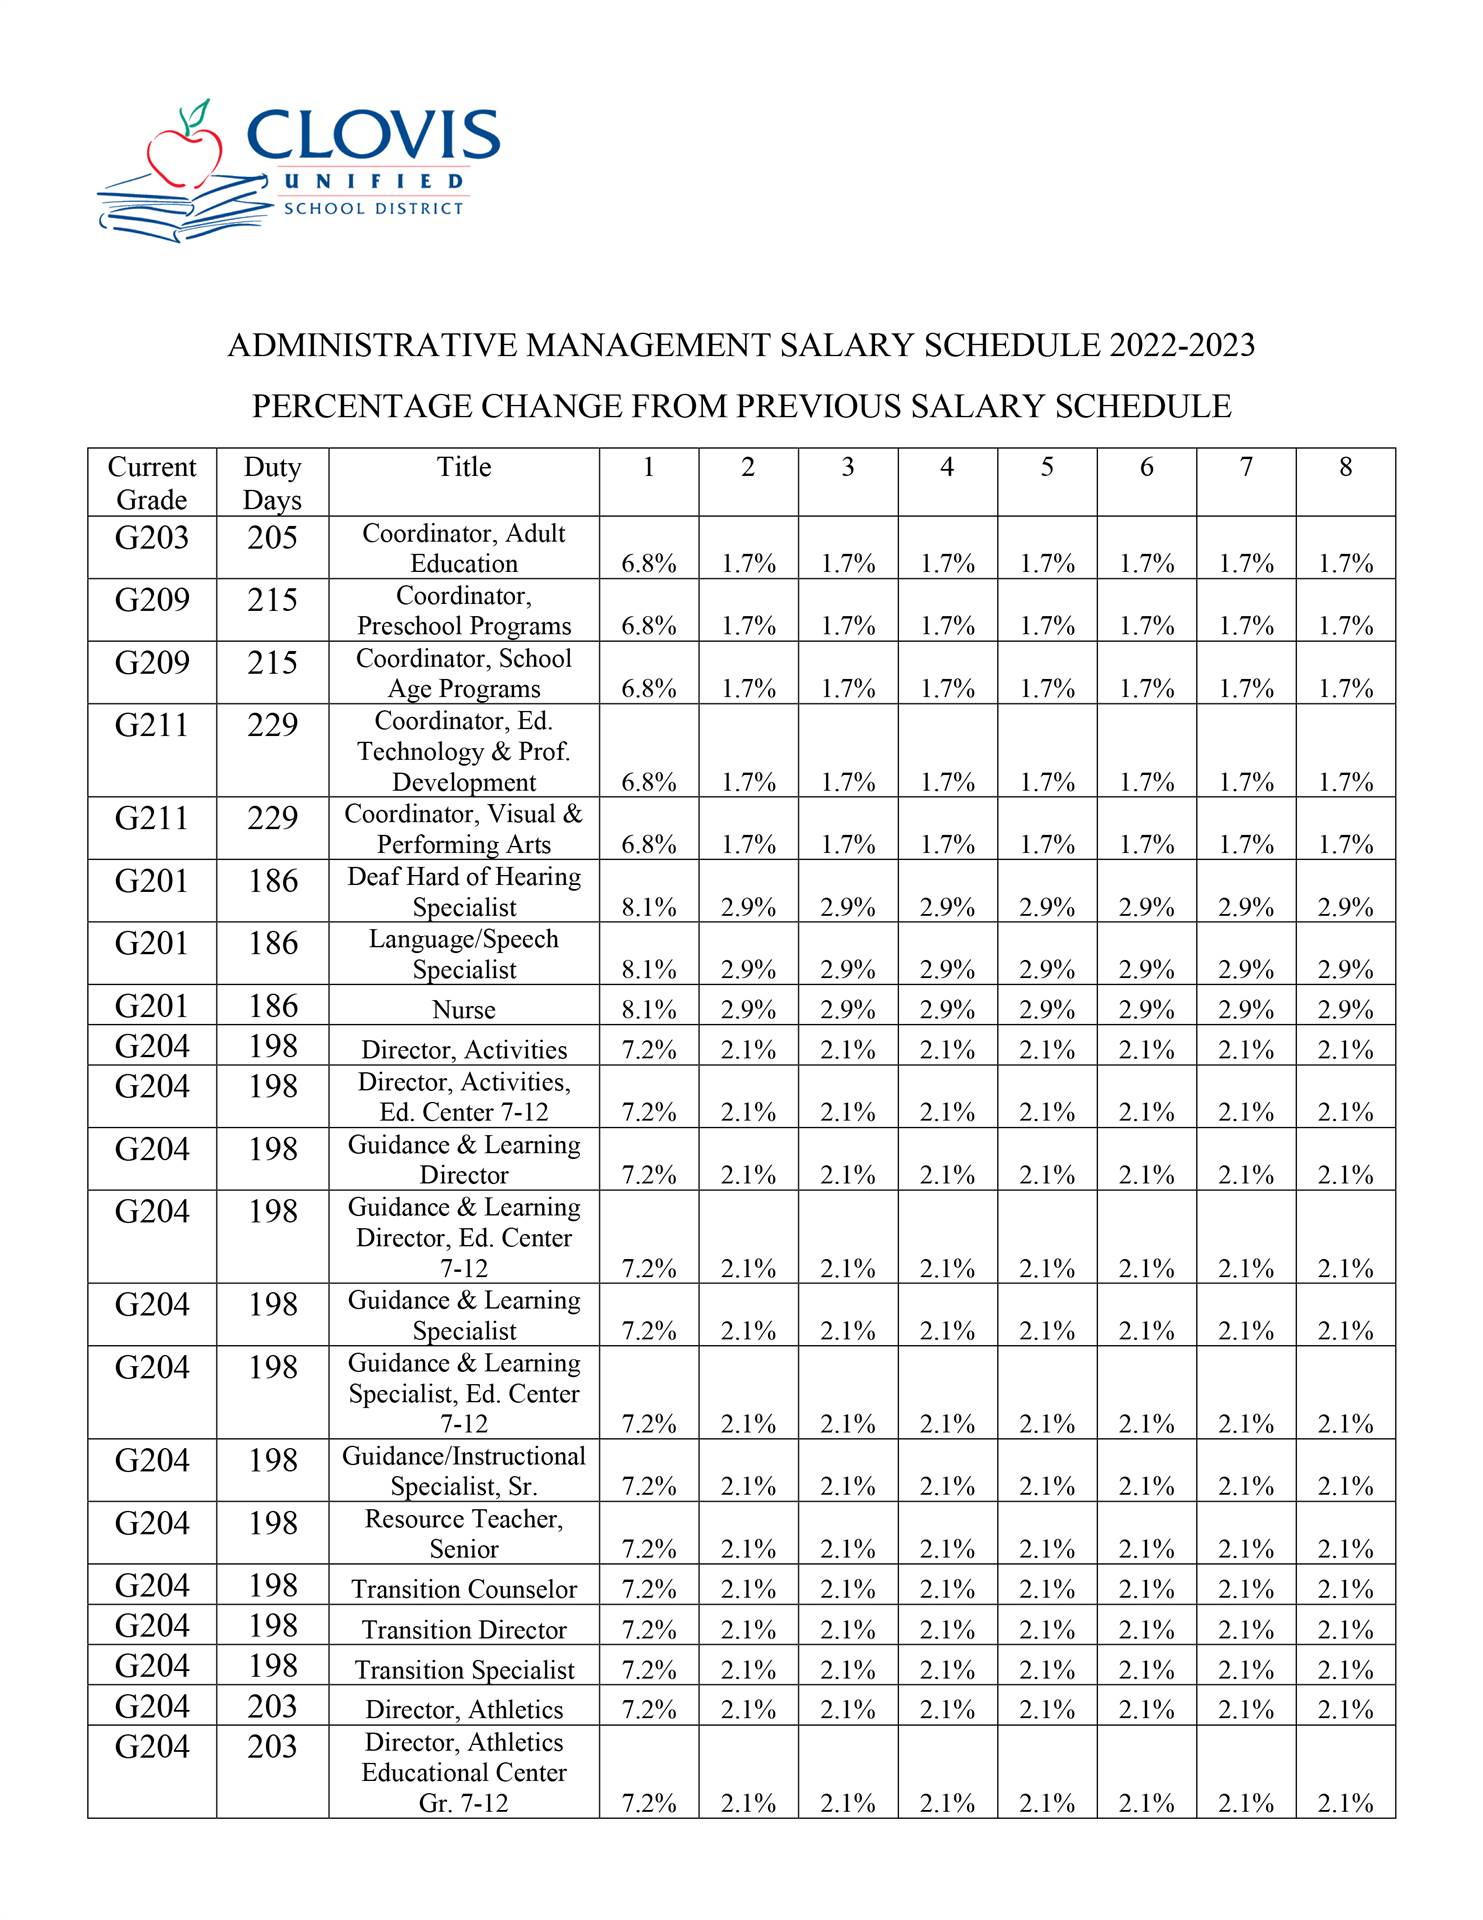 Certificated Management Salary Schedule Percentage Change 1